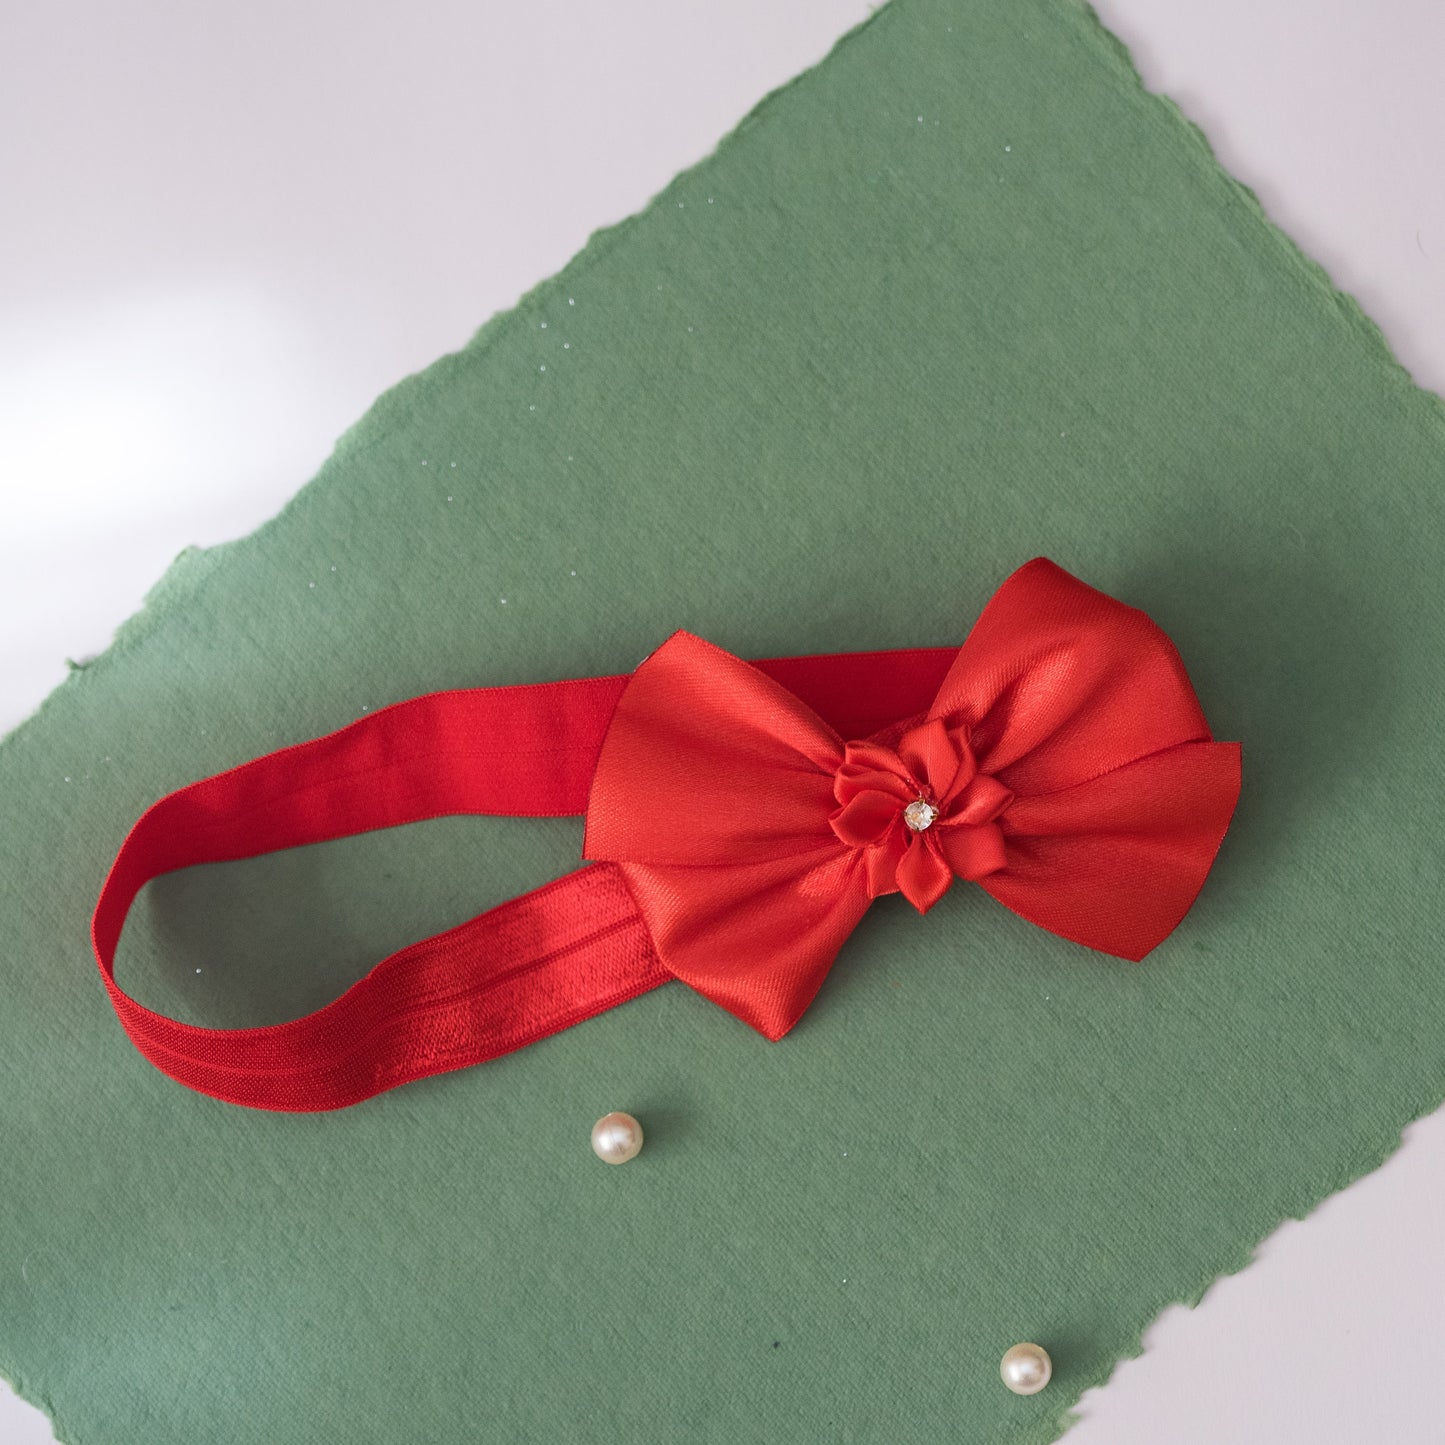 Ribbon Candy - Satin Bow on Stretchy Band - Red